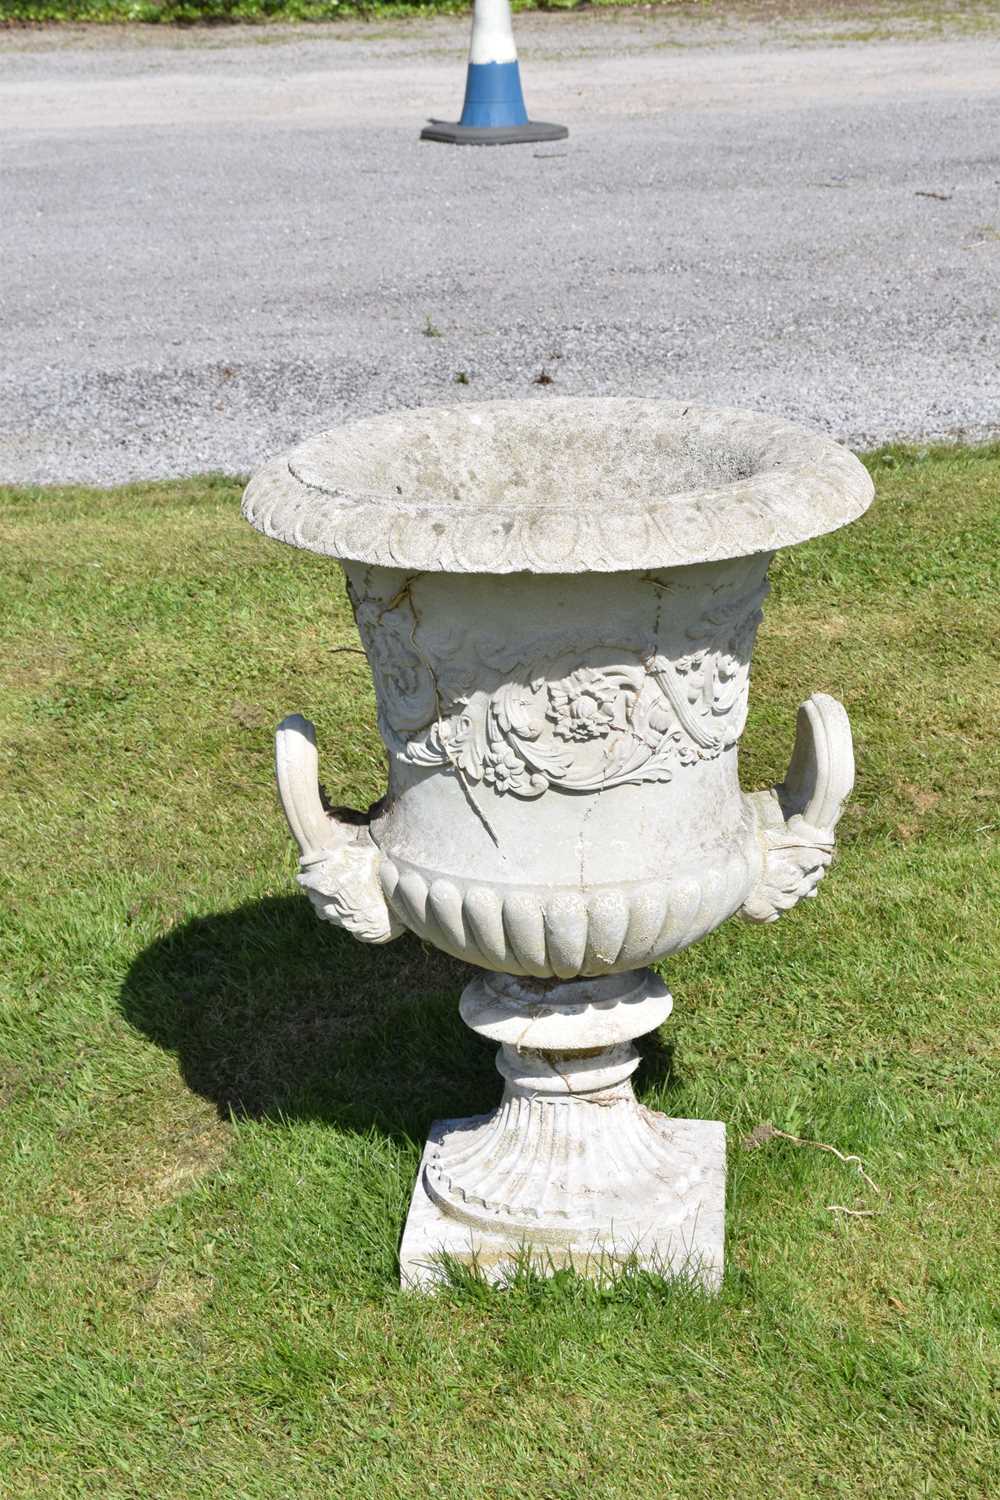 Composition stone garden urn and pedestal - Image 6 of 11